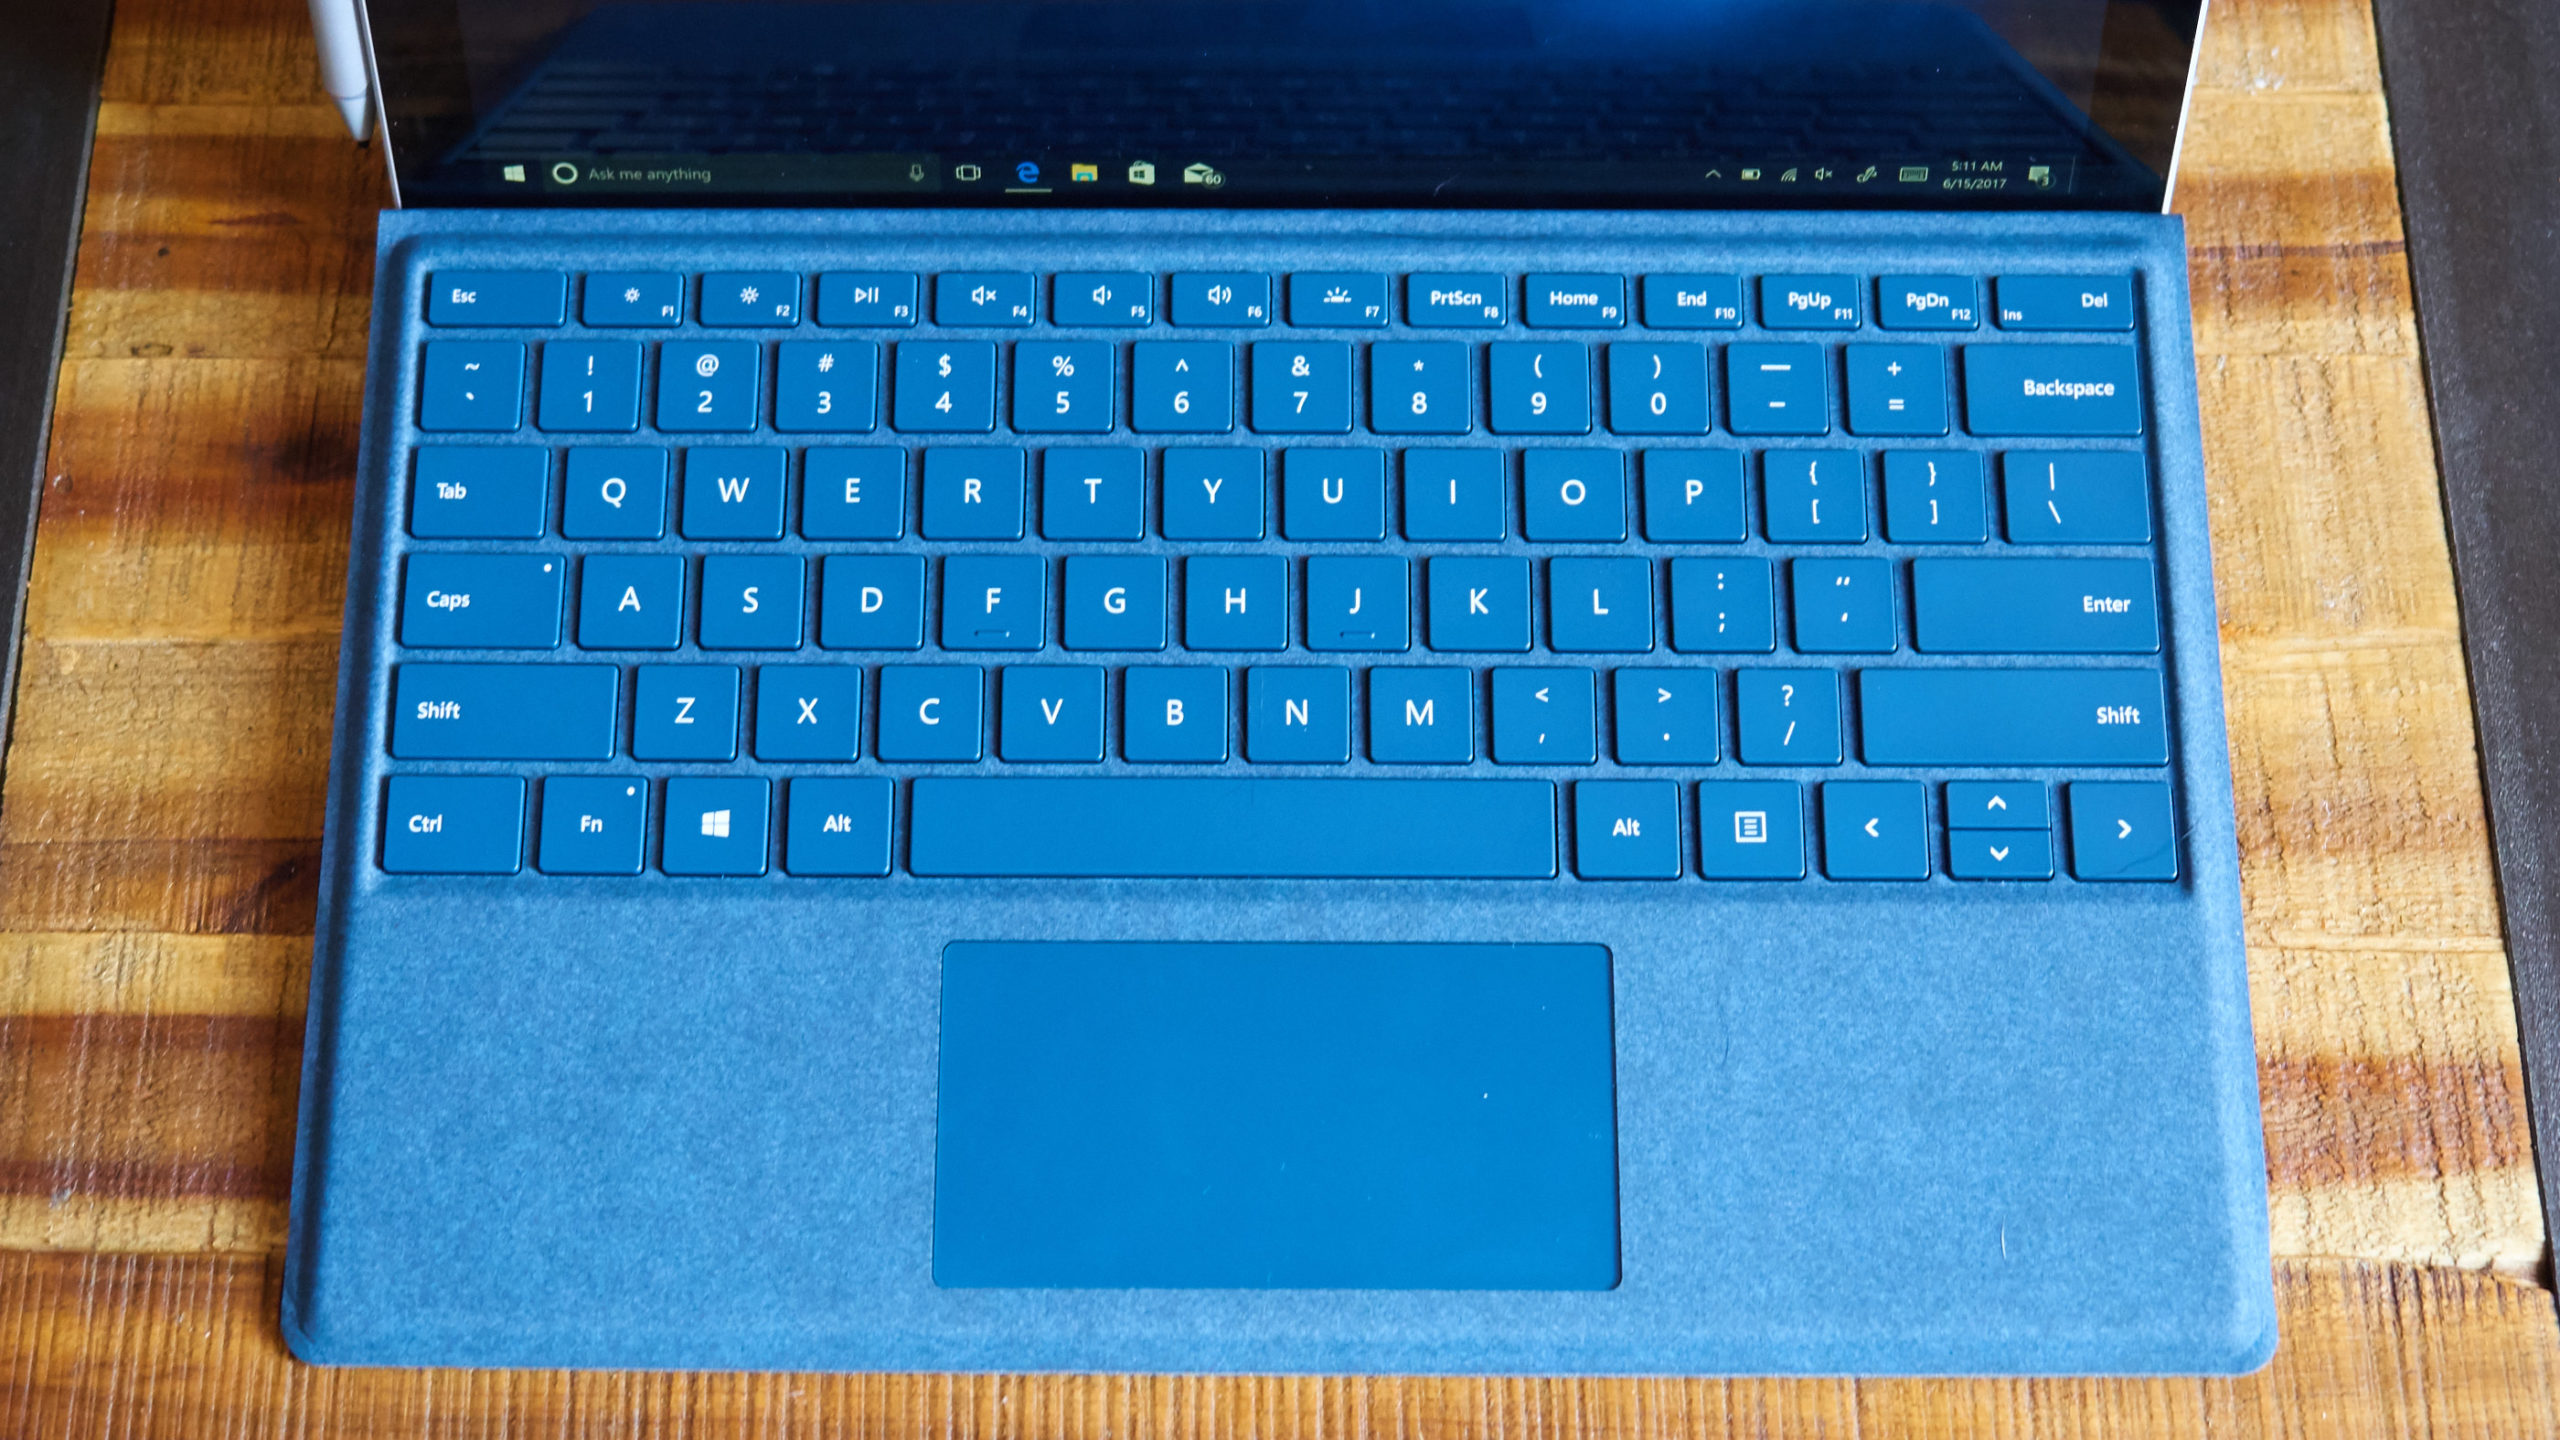 This Is The Best Surface Ever Made, But It’s Still No Laptop